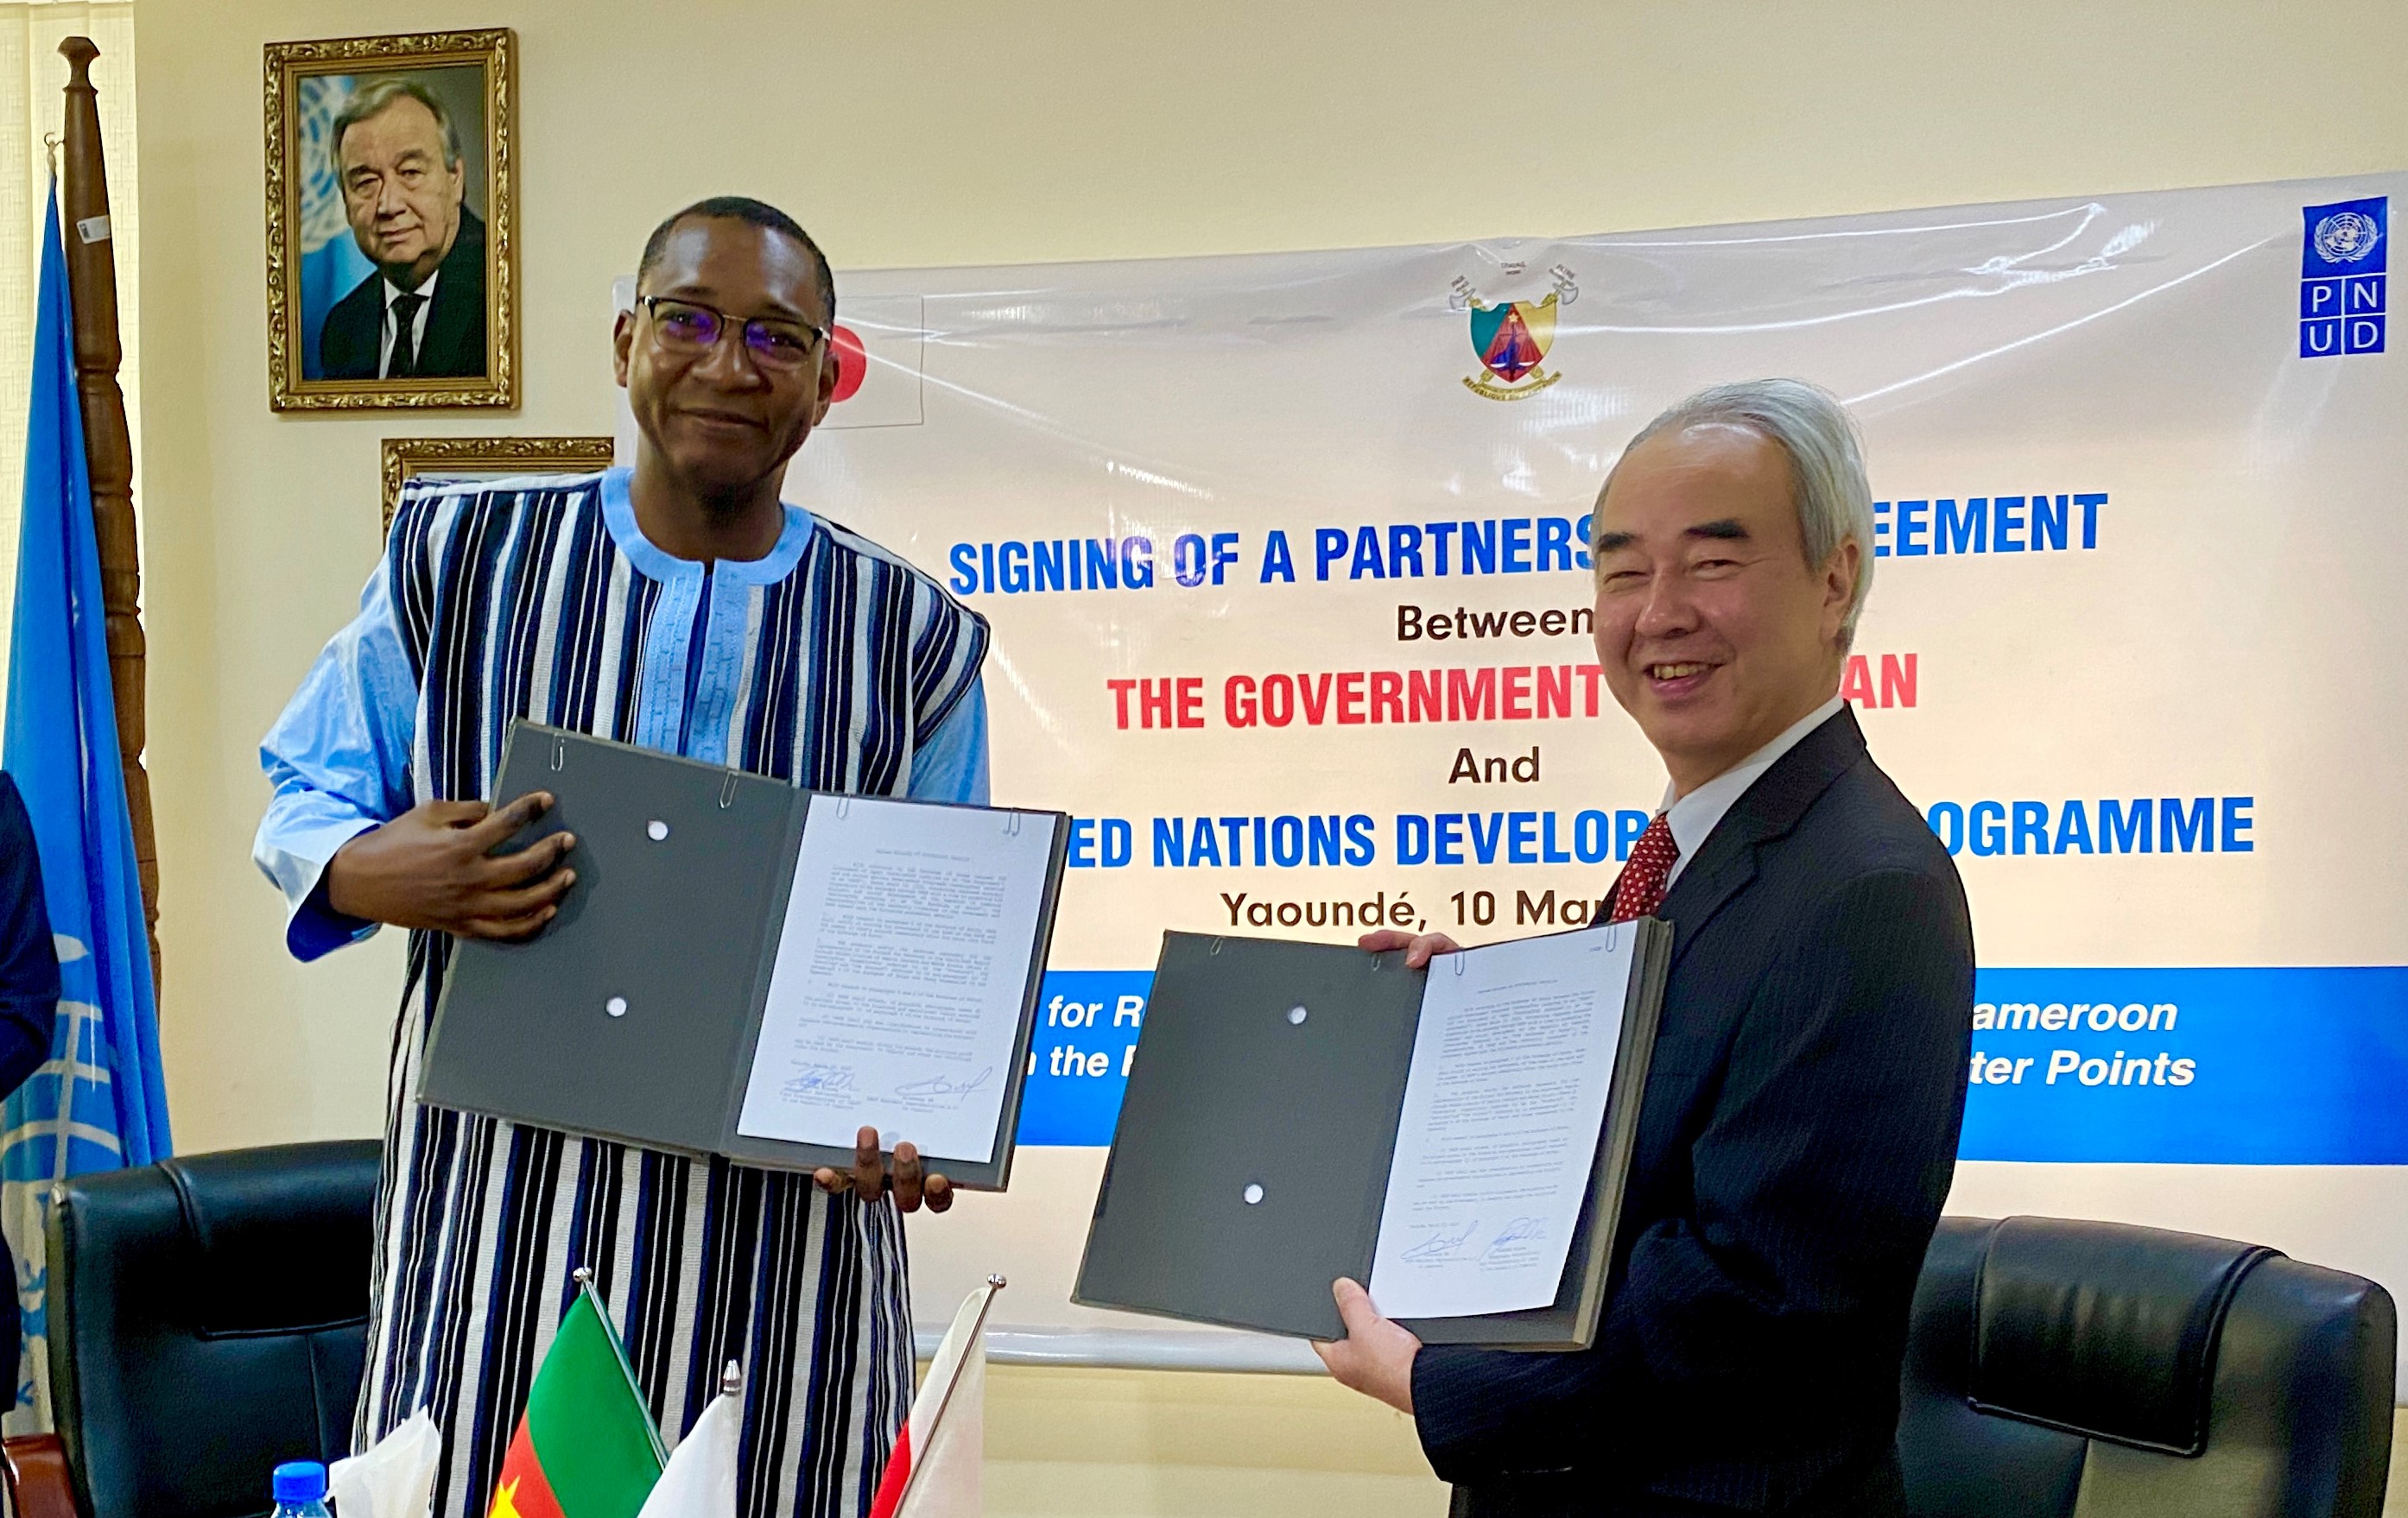 UNDP Cameroon’s Acting Resident Representative, Alassane Ba, and the Ambassador of Japan to Cameroon, H.E. Mr. TAKAOKA Nozomu, presenting the signed agreement during the ceremony-2023